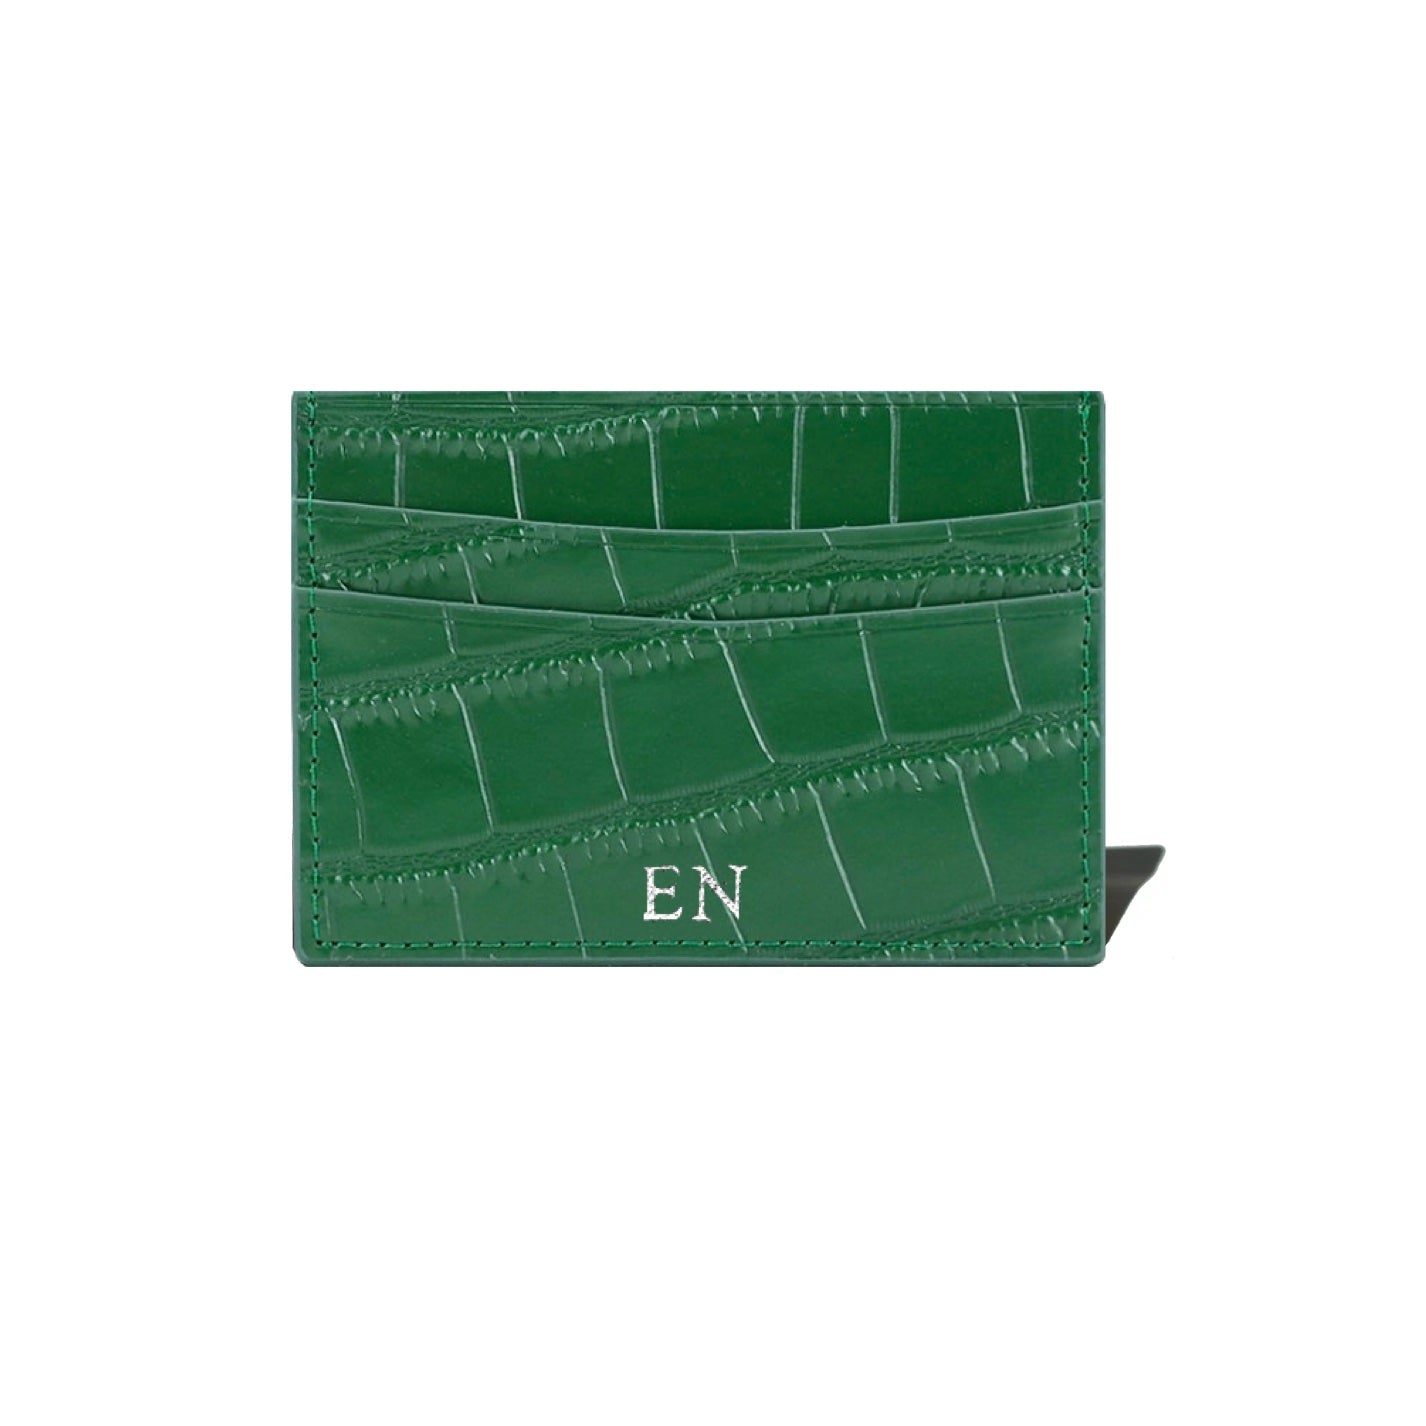 CARD HOLDER IN GREEN CROC LEATHER